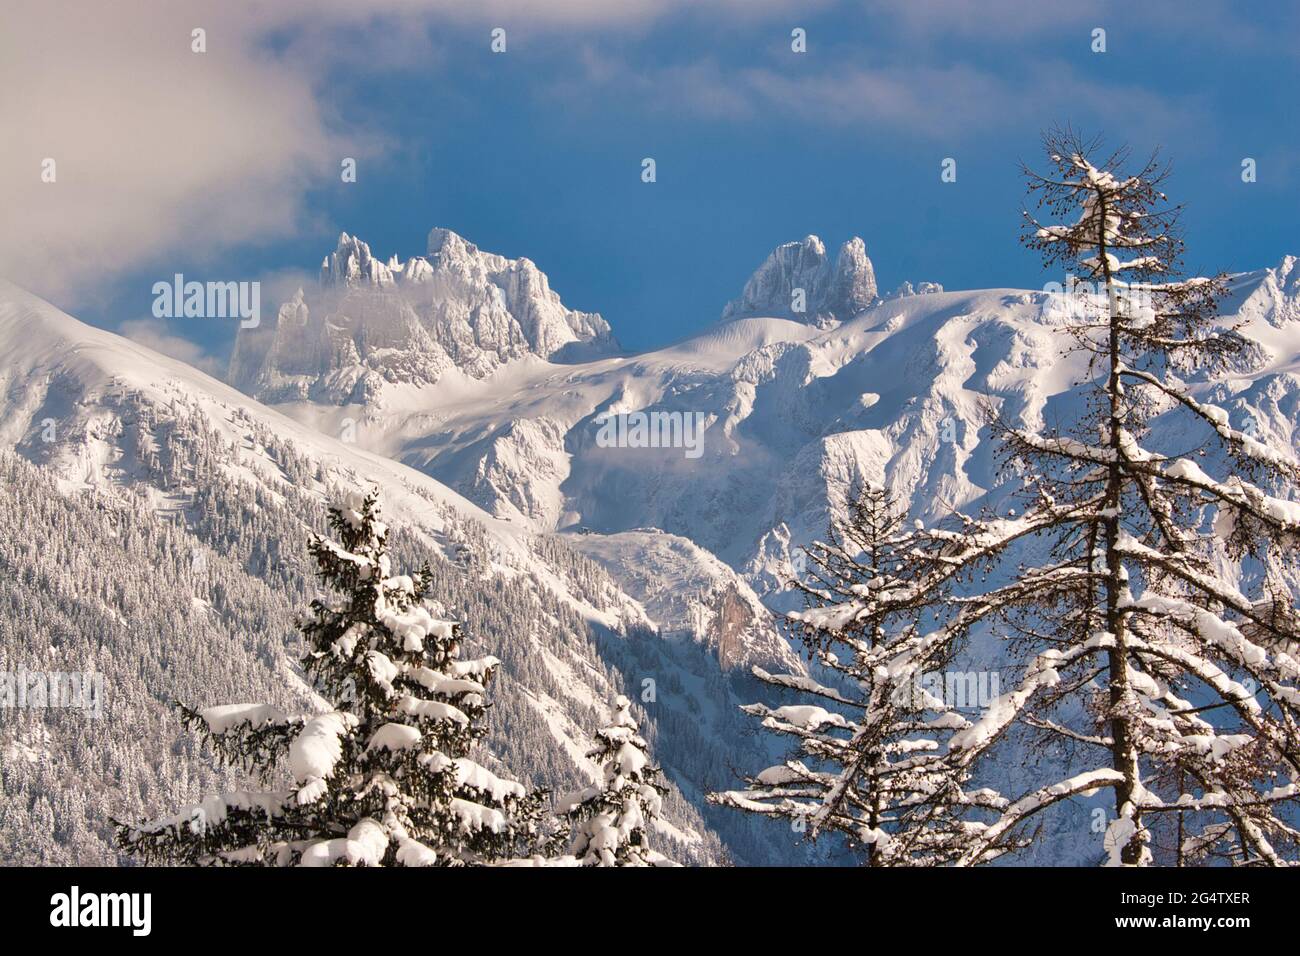 Sunlit view of two mountain peaks in central Switzerland, Great Spannort on the left and Little Spannort on the right, above Engelberg with trees Stock Photo